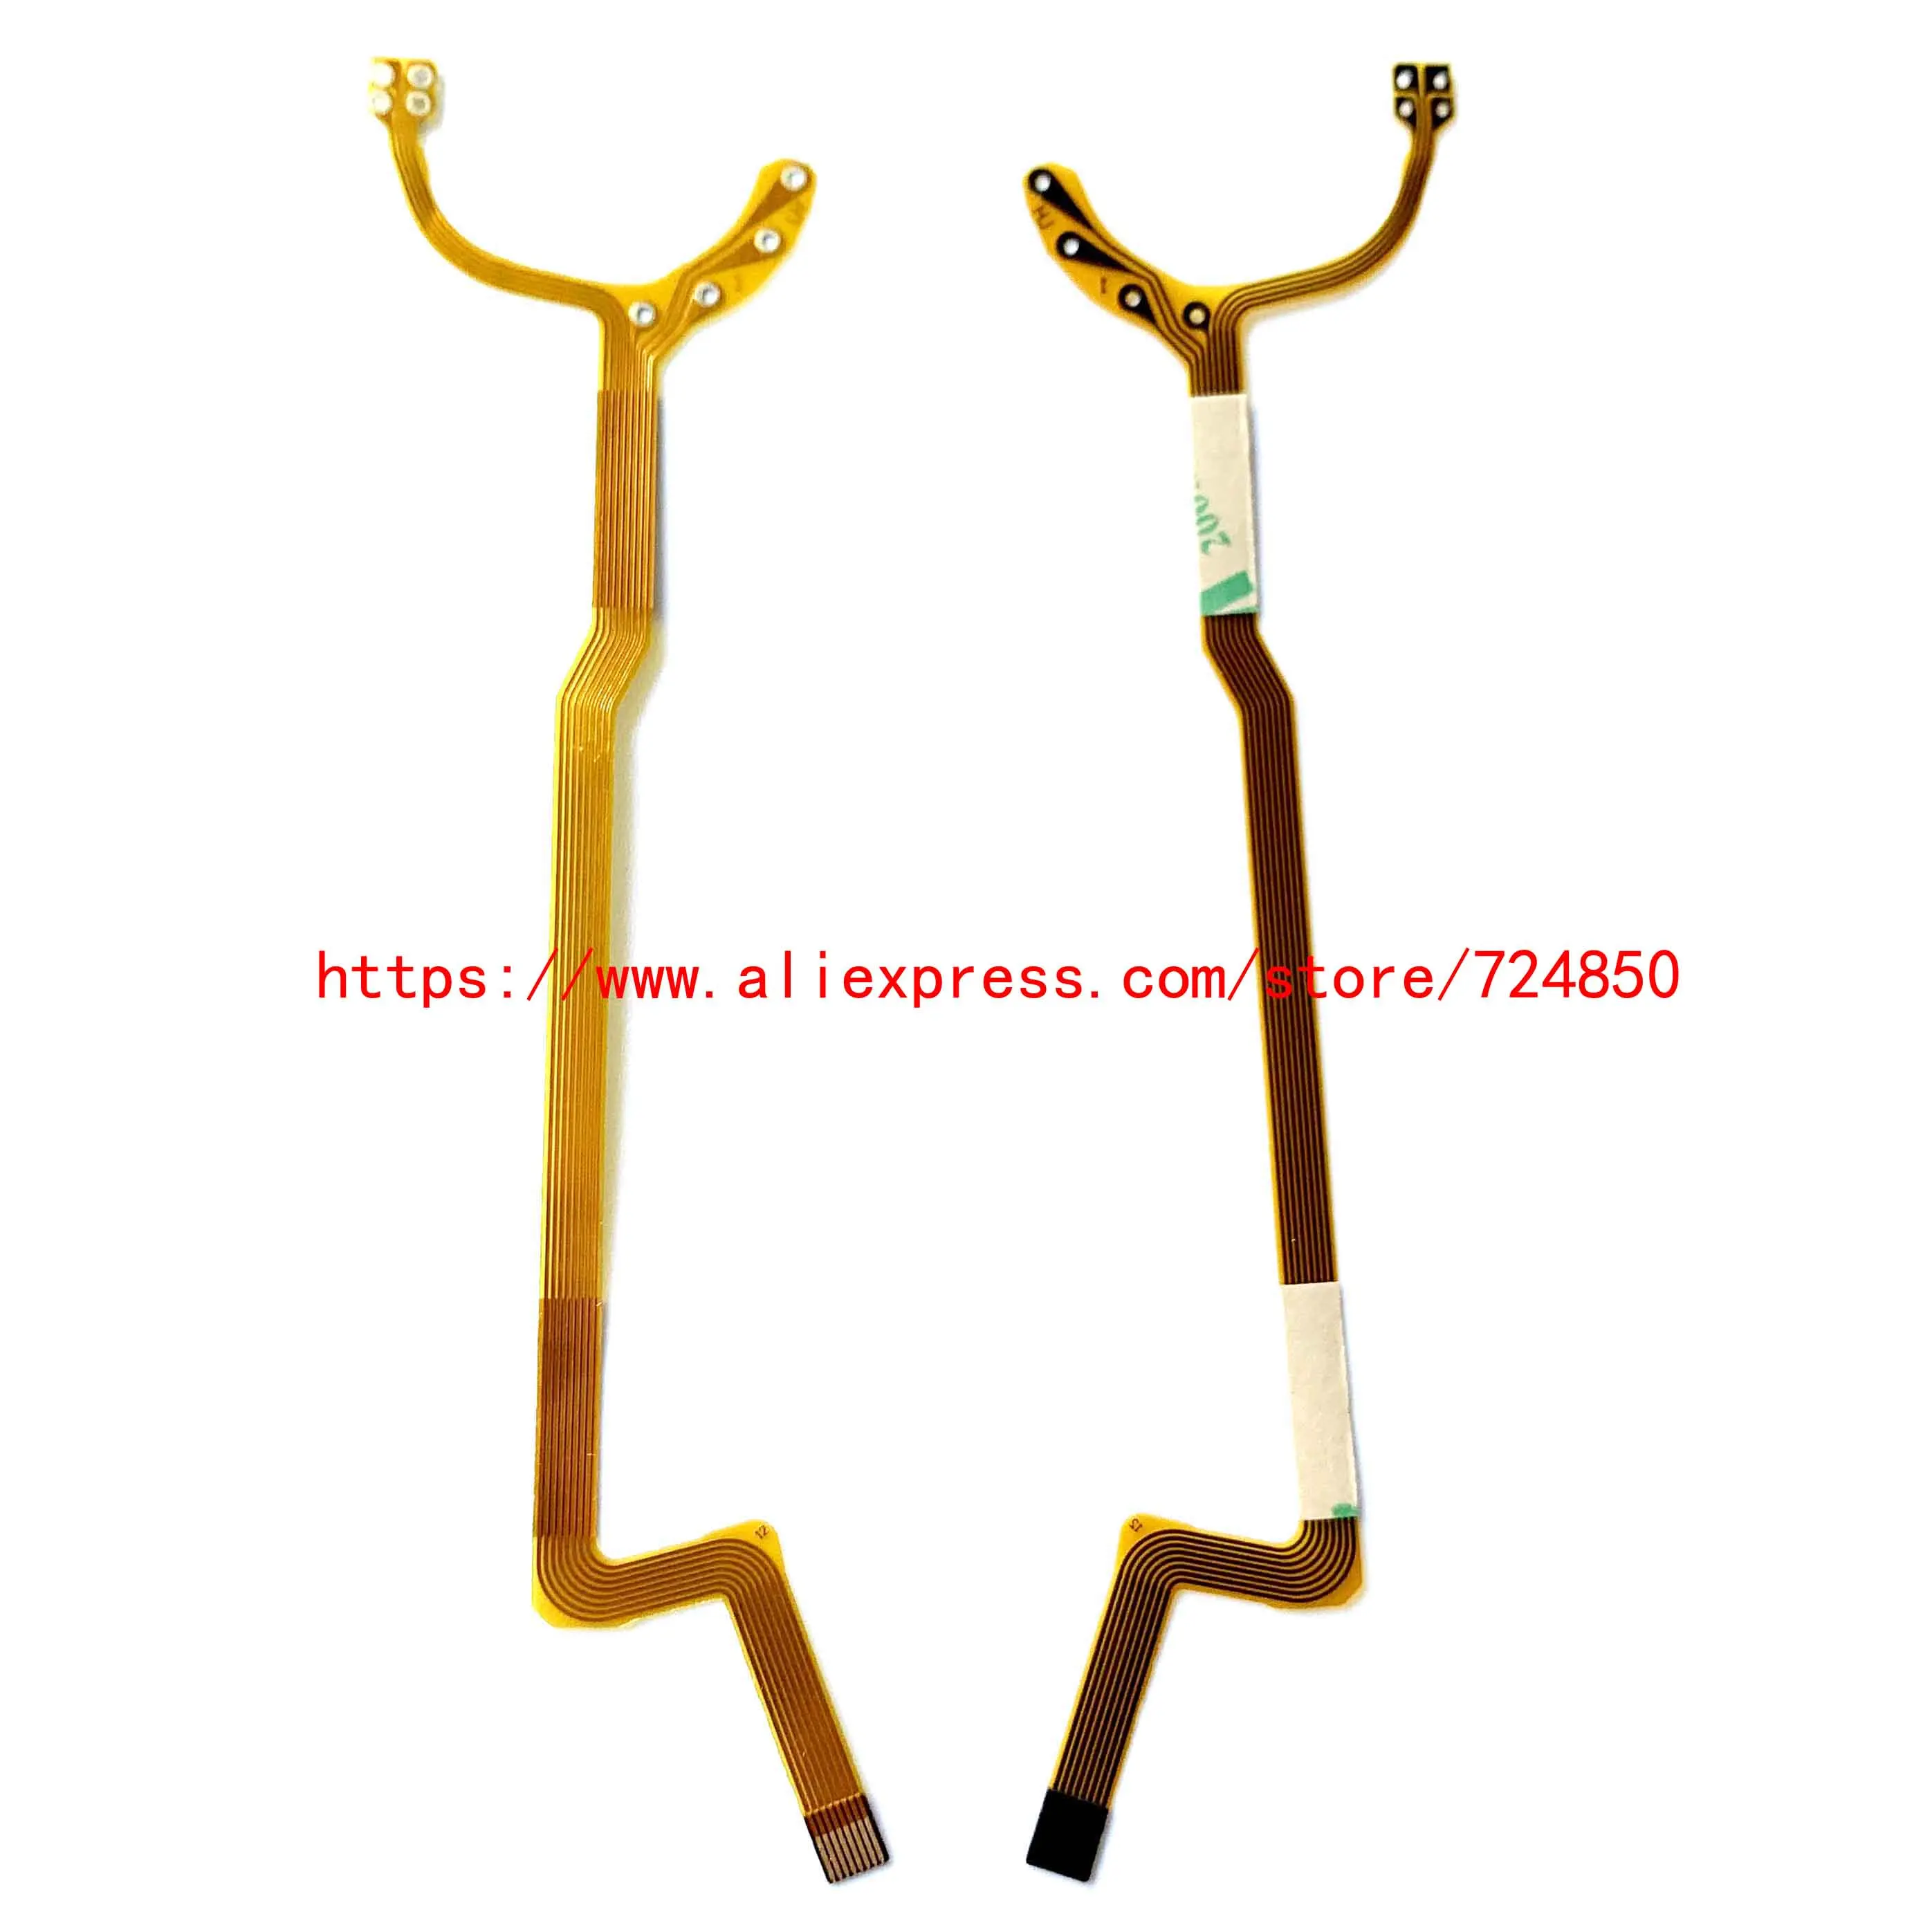 NEW Lens Aperture Flex Cable for CANON EF-S 18-55mm 18-55 mm f/3.5-5.6 (no have IS lens) repair part